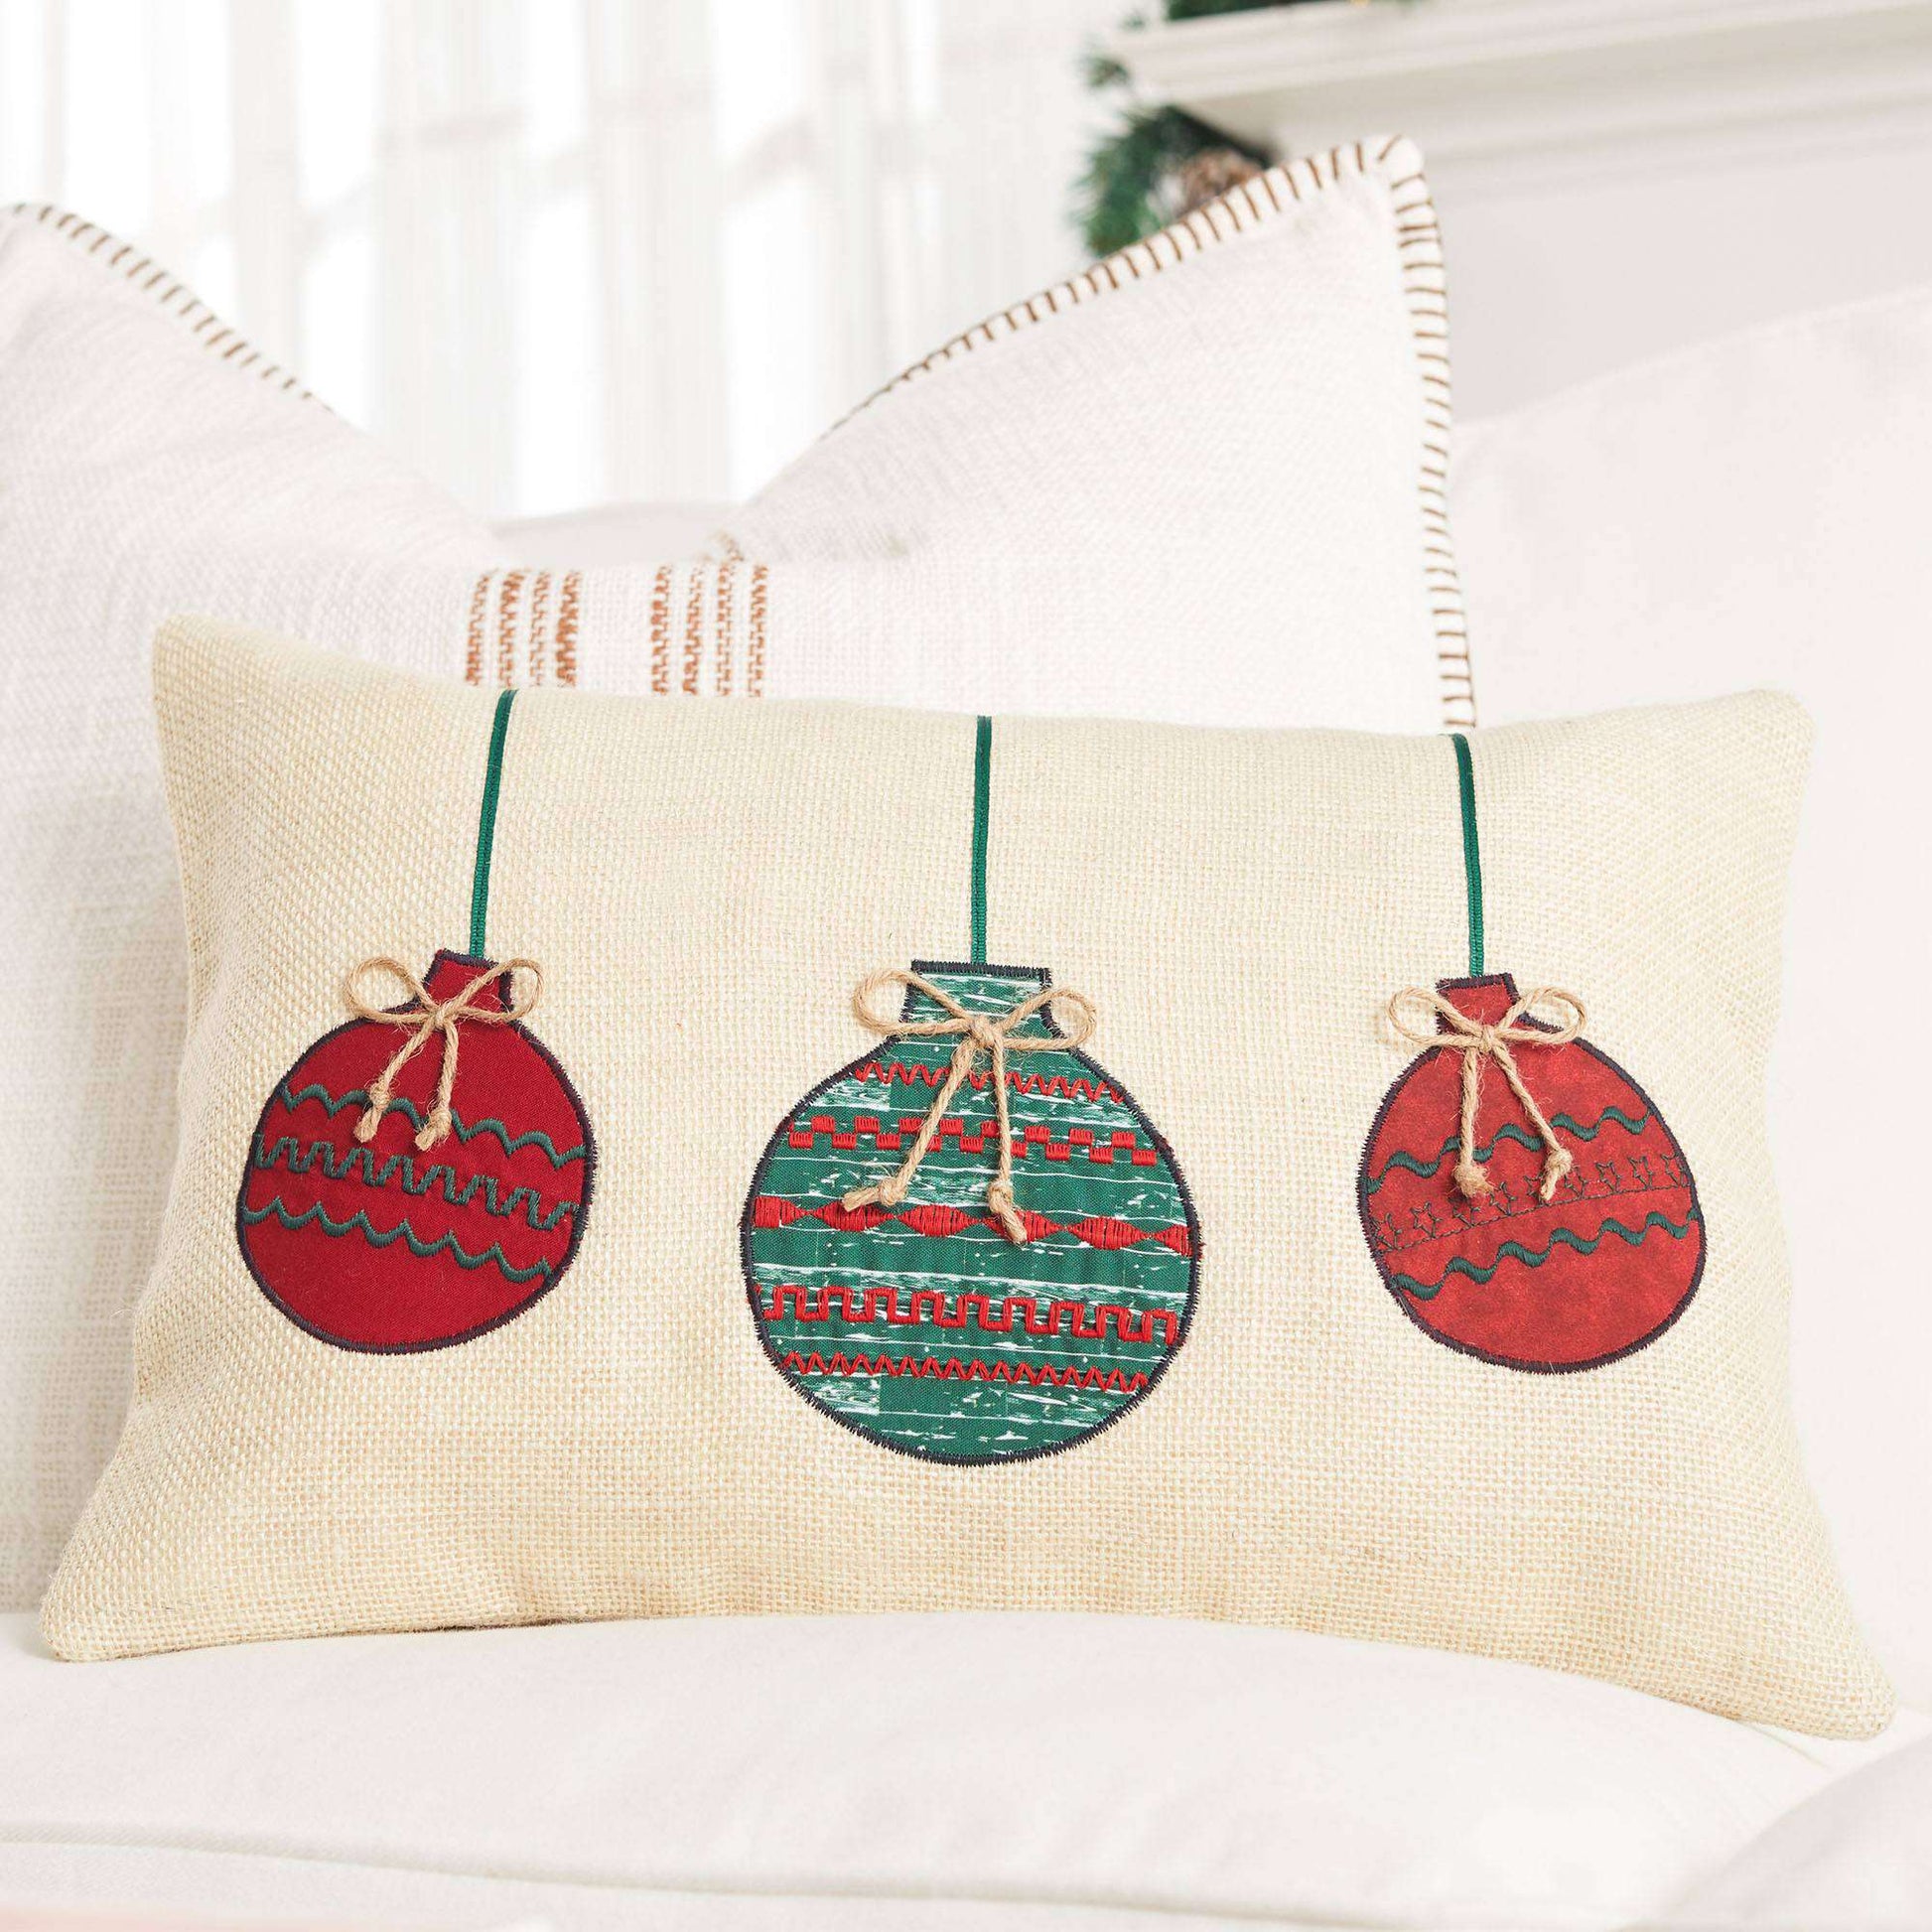 Free Coats & Clark Ornament Trio Pillow Sewing Pattern